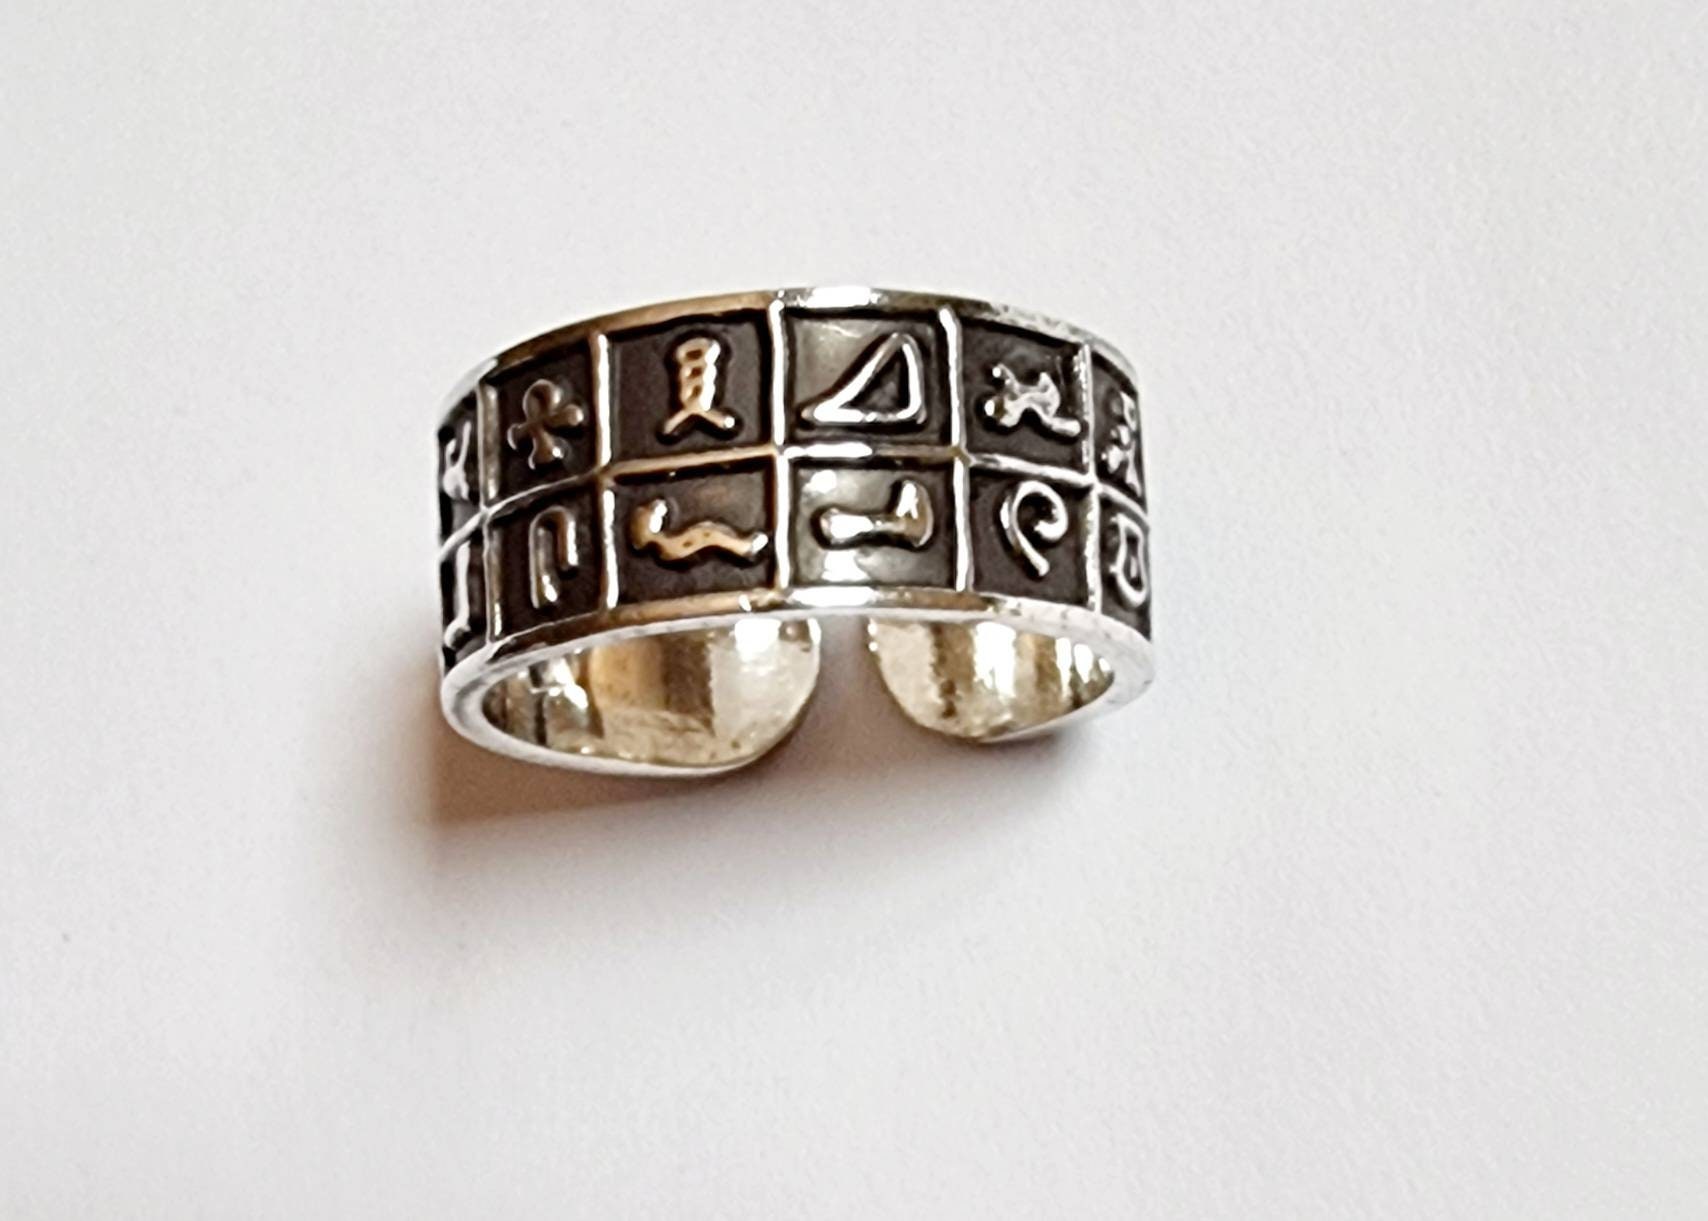 Amazon.com: Vintage 925 Sterling Silver Egyptian Hieroglyphics Ring Jewelry  with Horus Anubis for Men Women,Size 7 : Everything Else